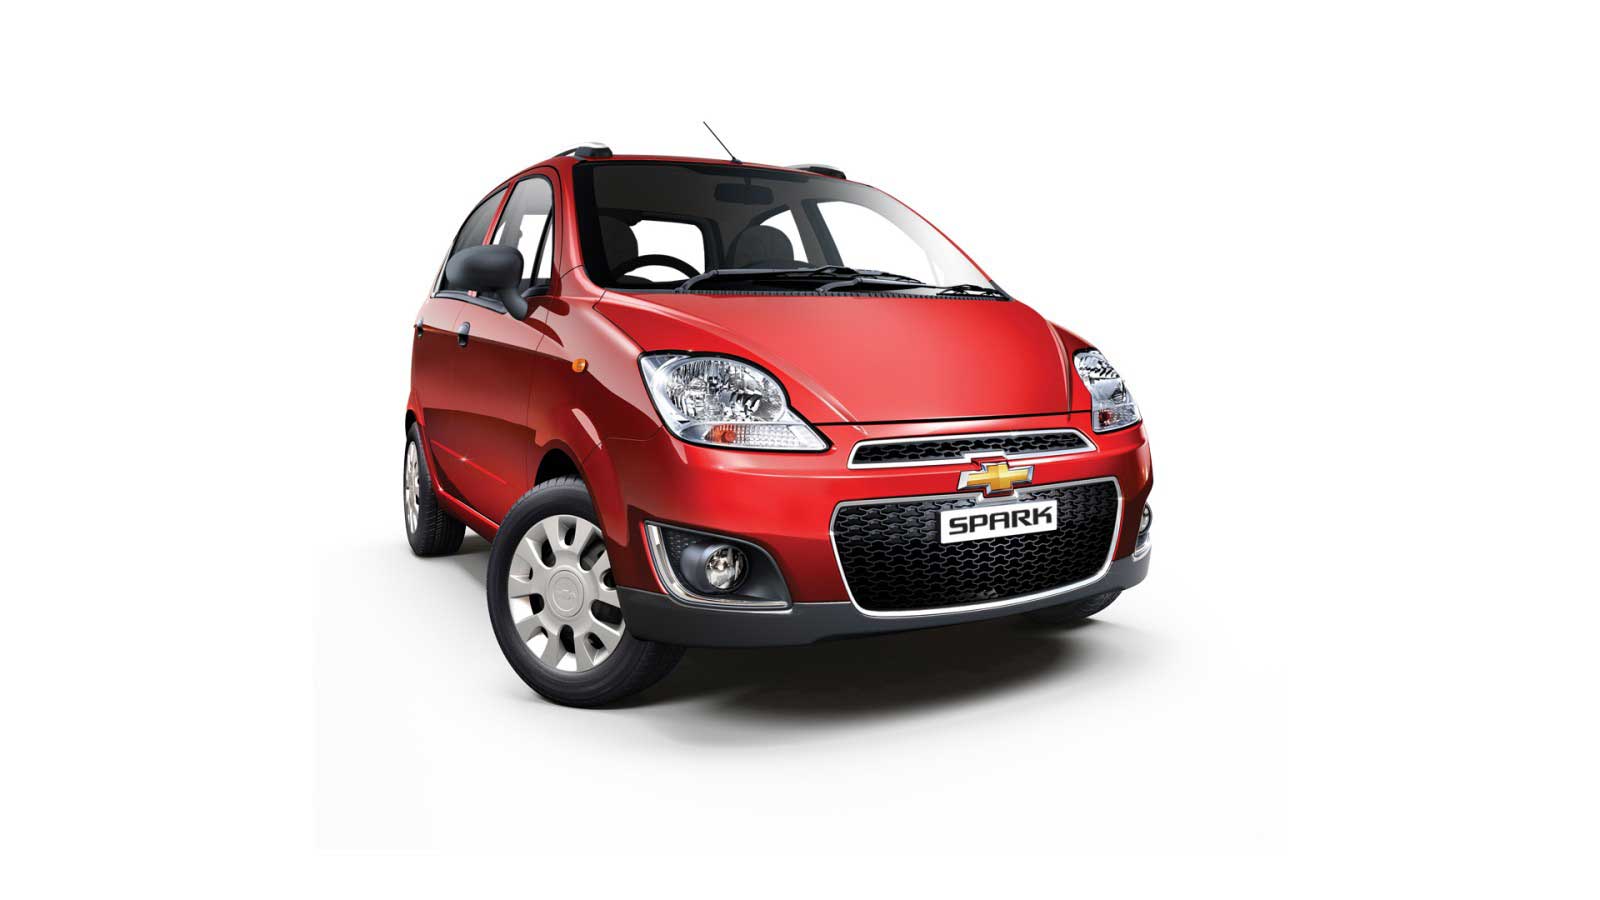 Chevrolet Spark 1.0 BS-IV OBDII Exterior front cross view